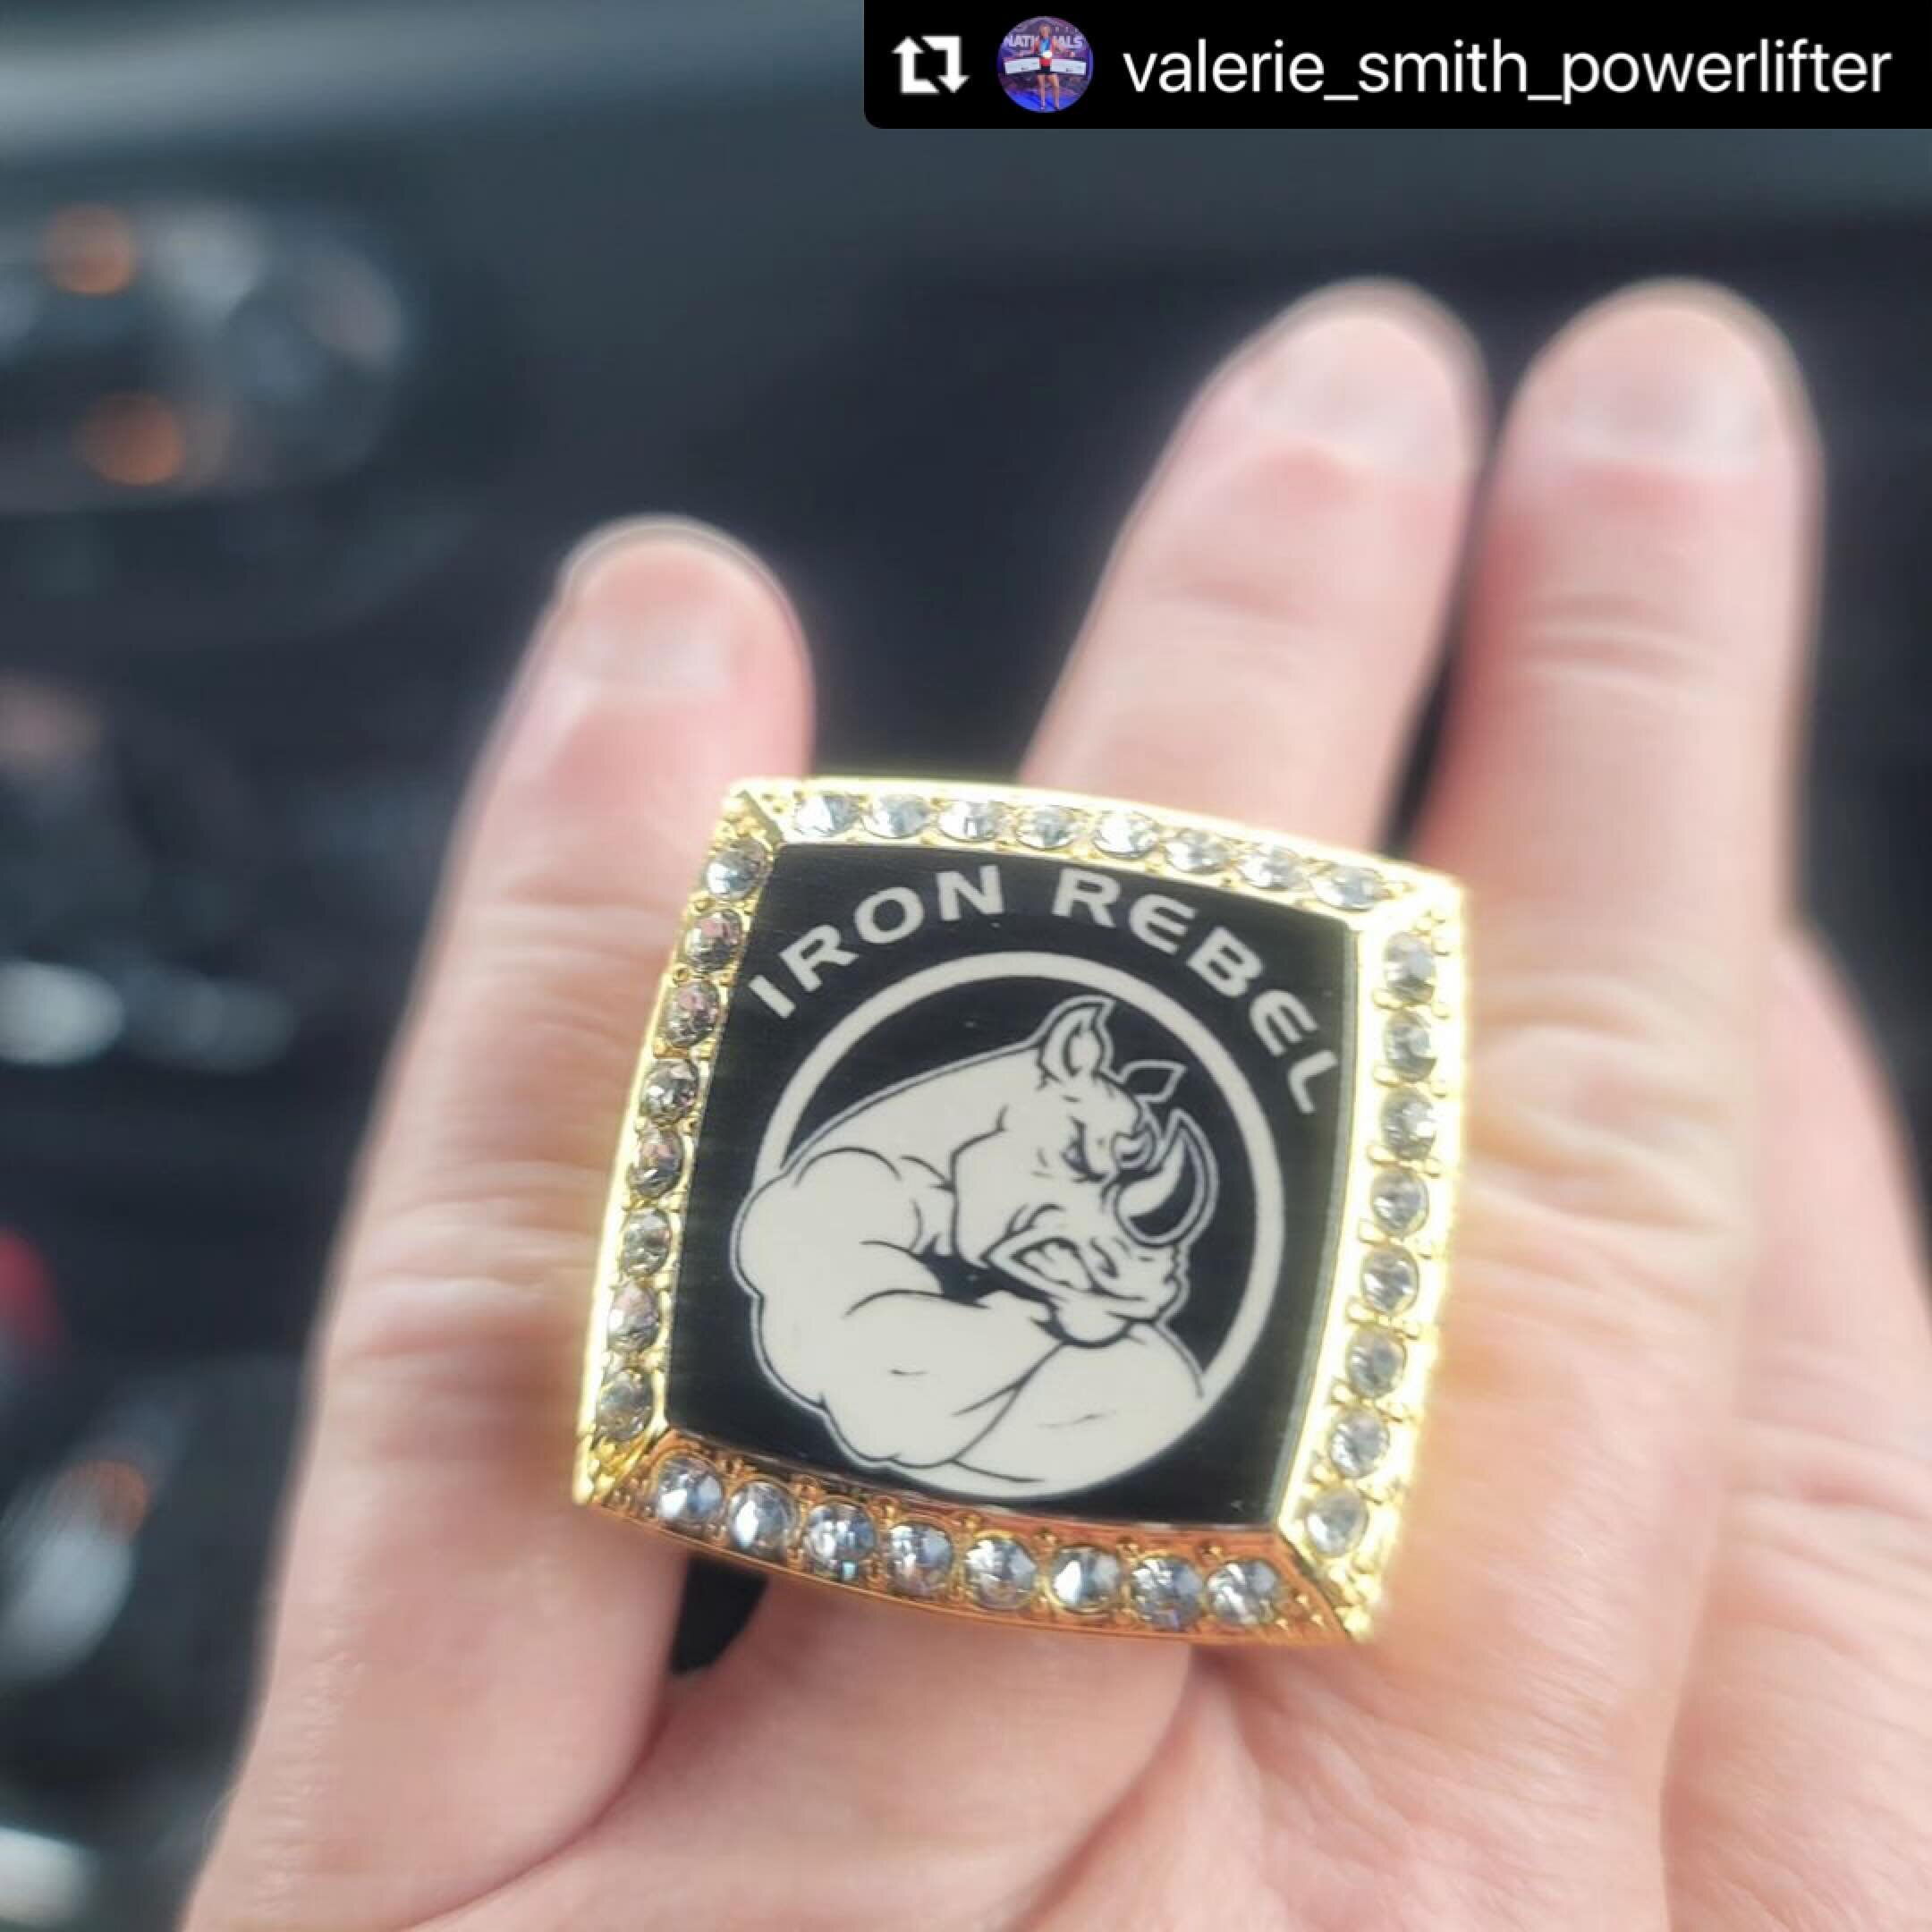 A very good day!! Congrats!!!

#Repost @valerie_smith_powerlifter
・・・
It was a good day at IPL Master&rsquo;s Cup 
9 State Records
6 National Records
6 World Records
Best Overall Female Tested lifter
Best Overall Female Tested Deadlift
Won some cash 